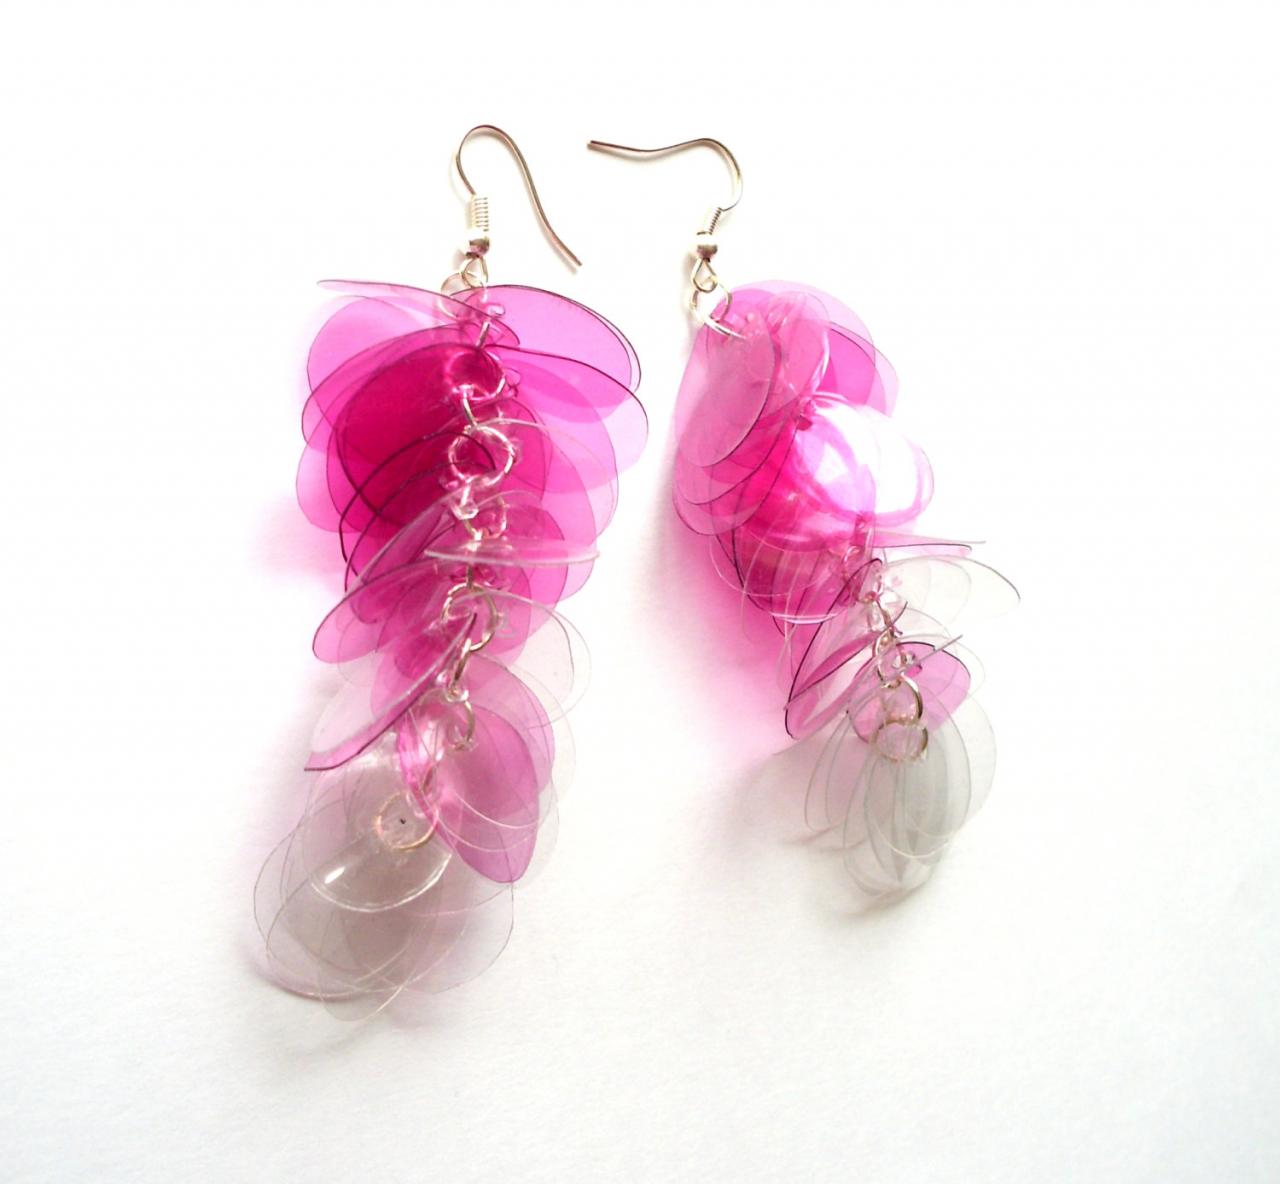 Long Earrings In Pink Ombre Handmade Of Recycled Plastic Bottles Repurposed Sustainable Eco Friendly Jewelry